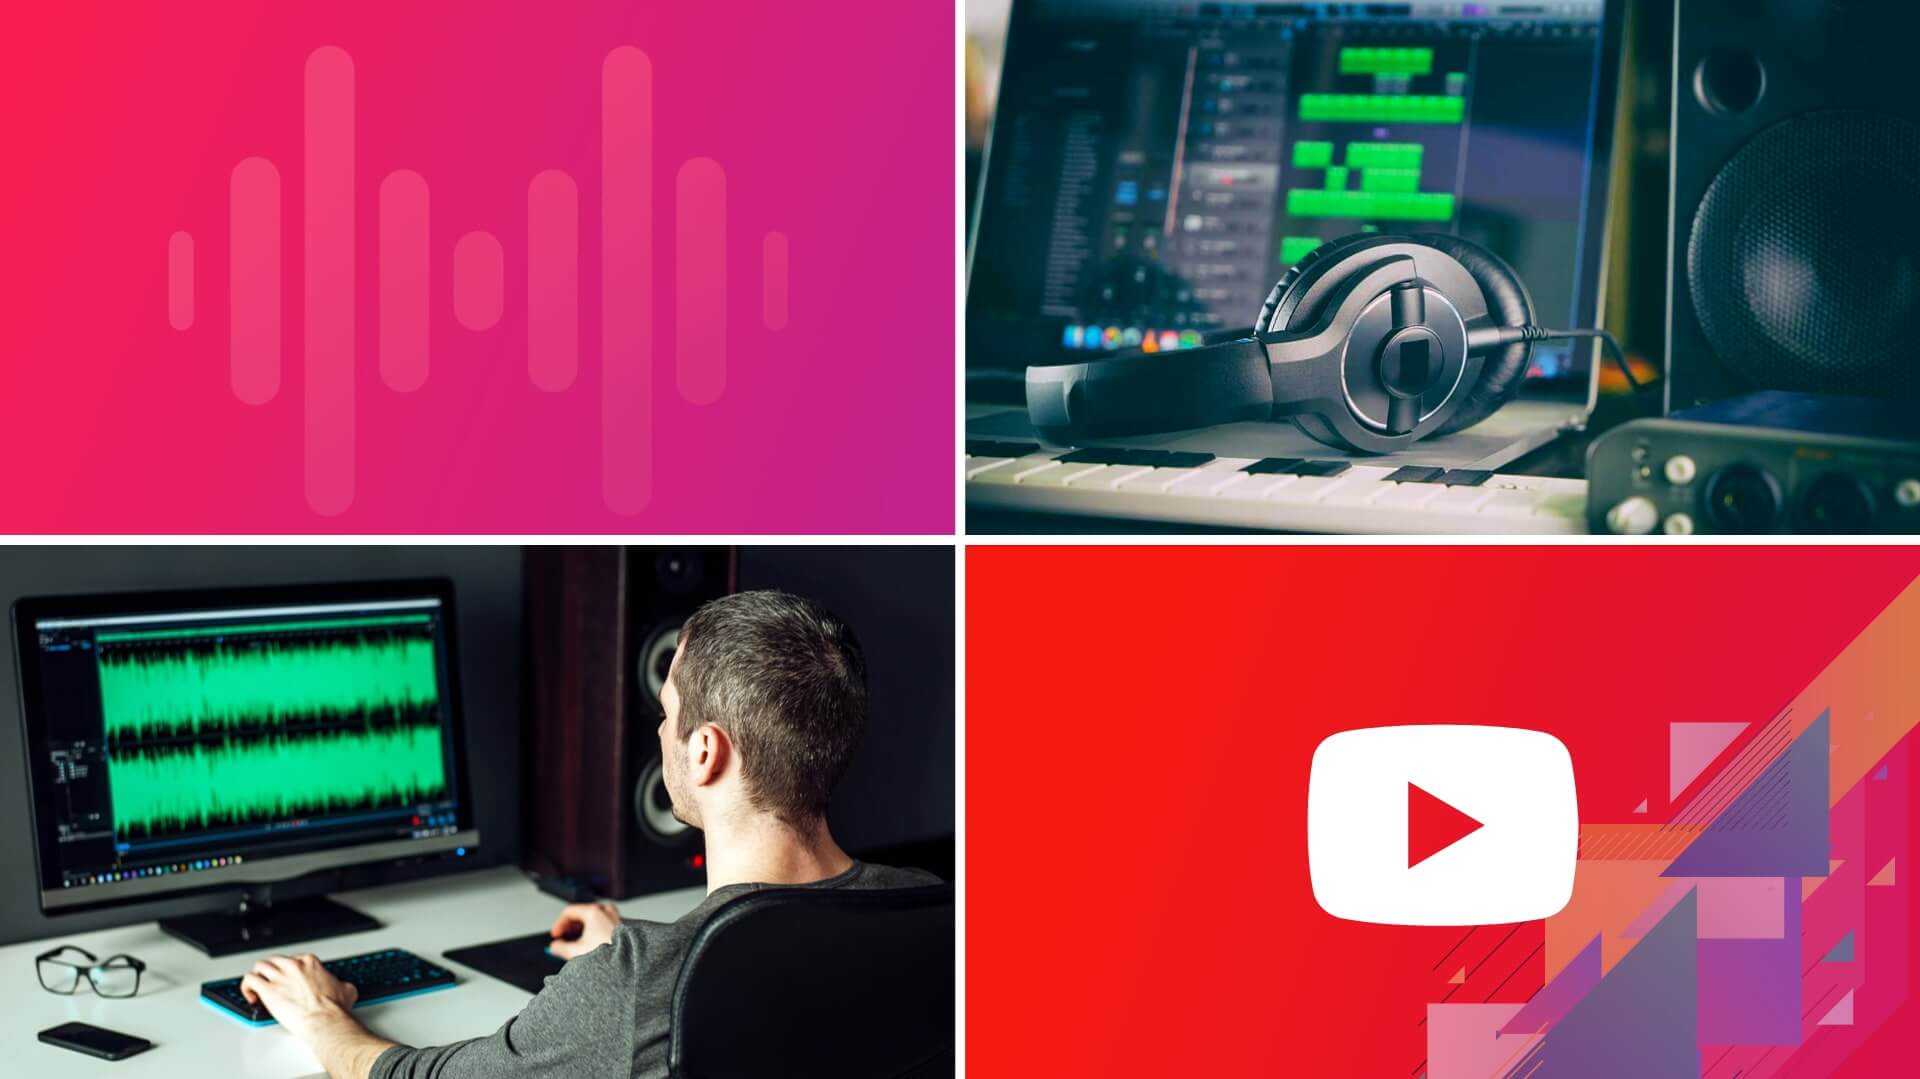 download youtube free audio library